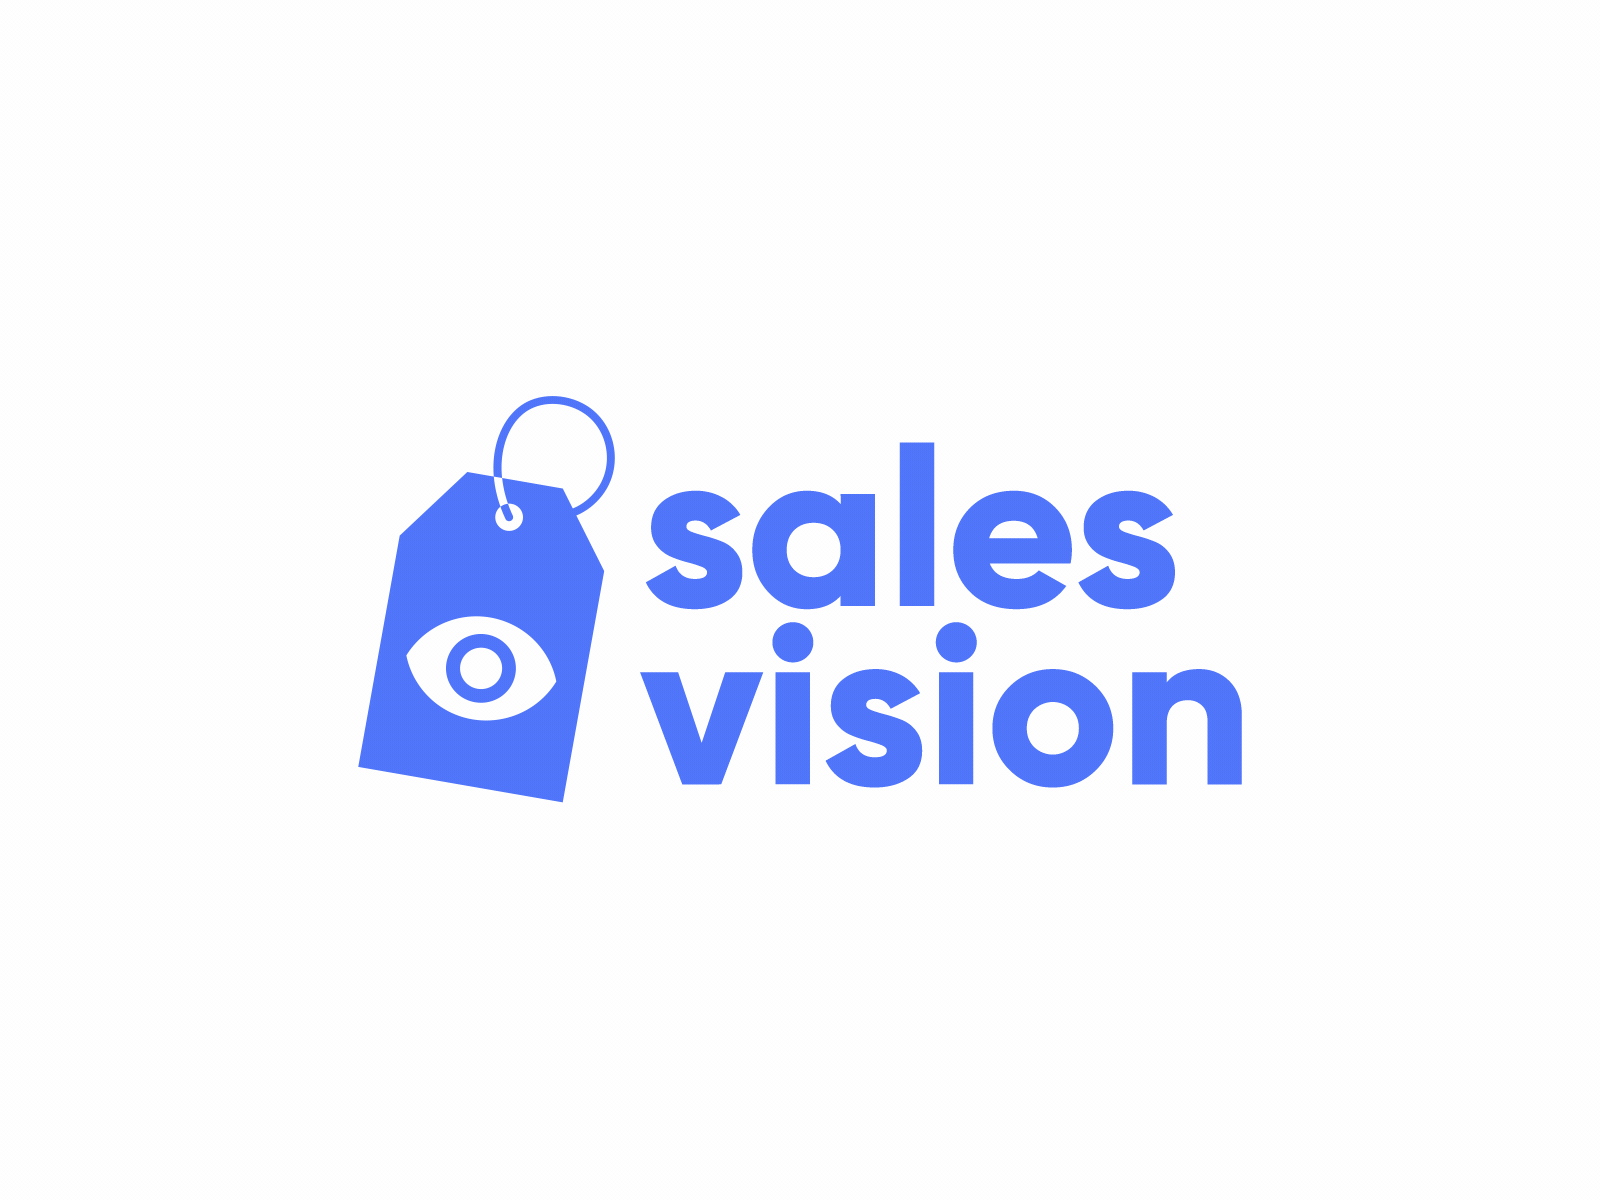 Salesvision logo animation animated animated logo 2d animation 2d simple motion after effects animation logo animation logo